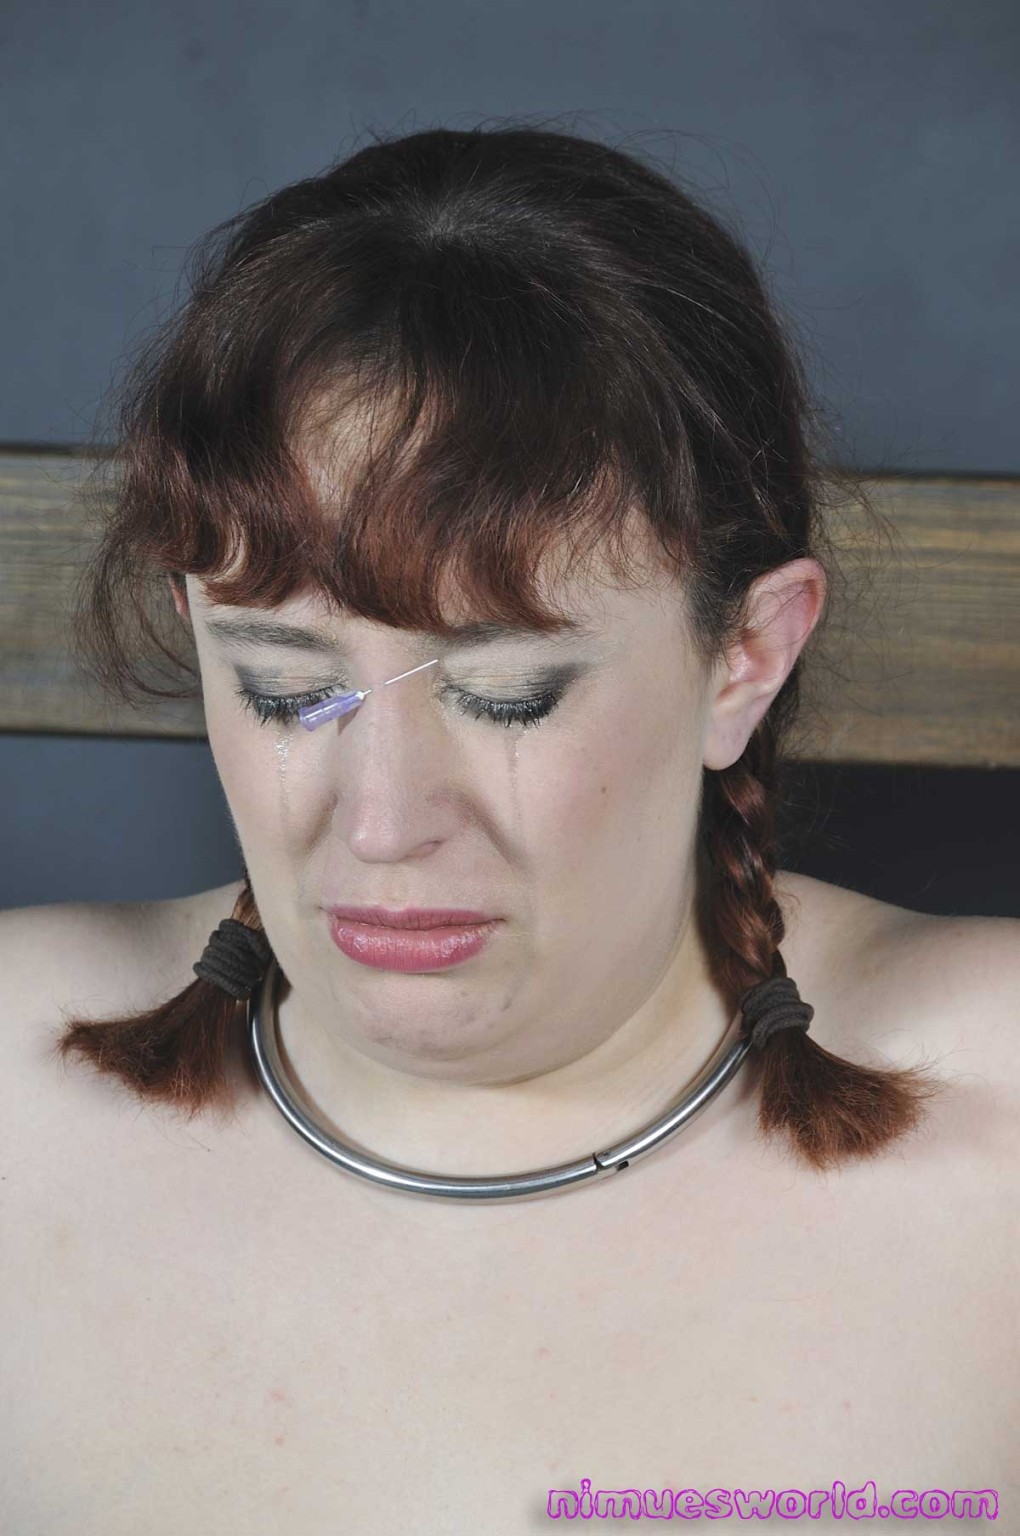 Facial needle pain and amateur bdsm of chubby nose tortured english submissive #72058497